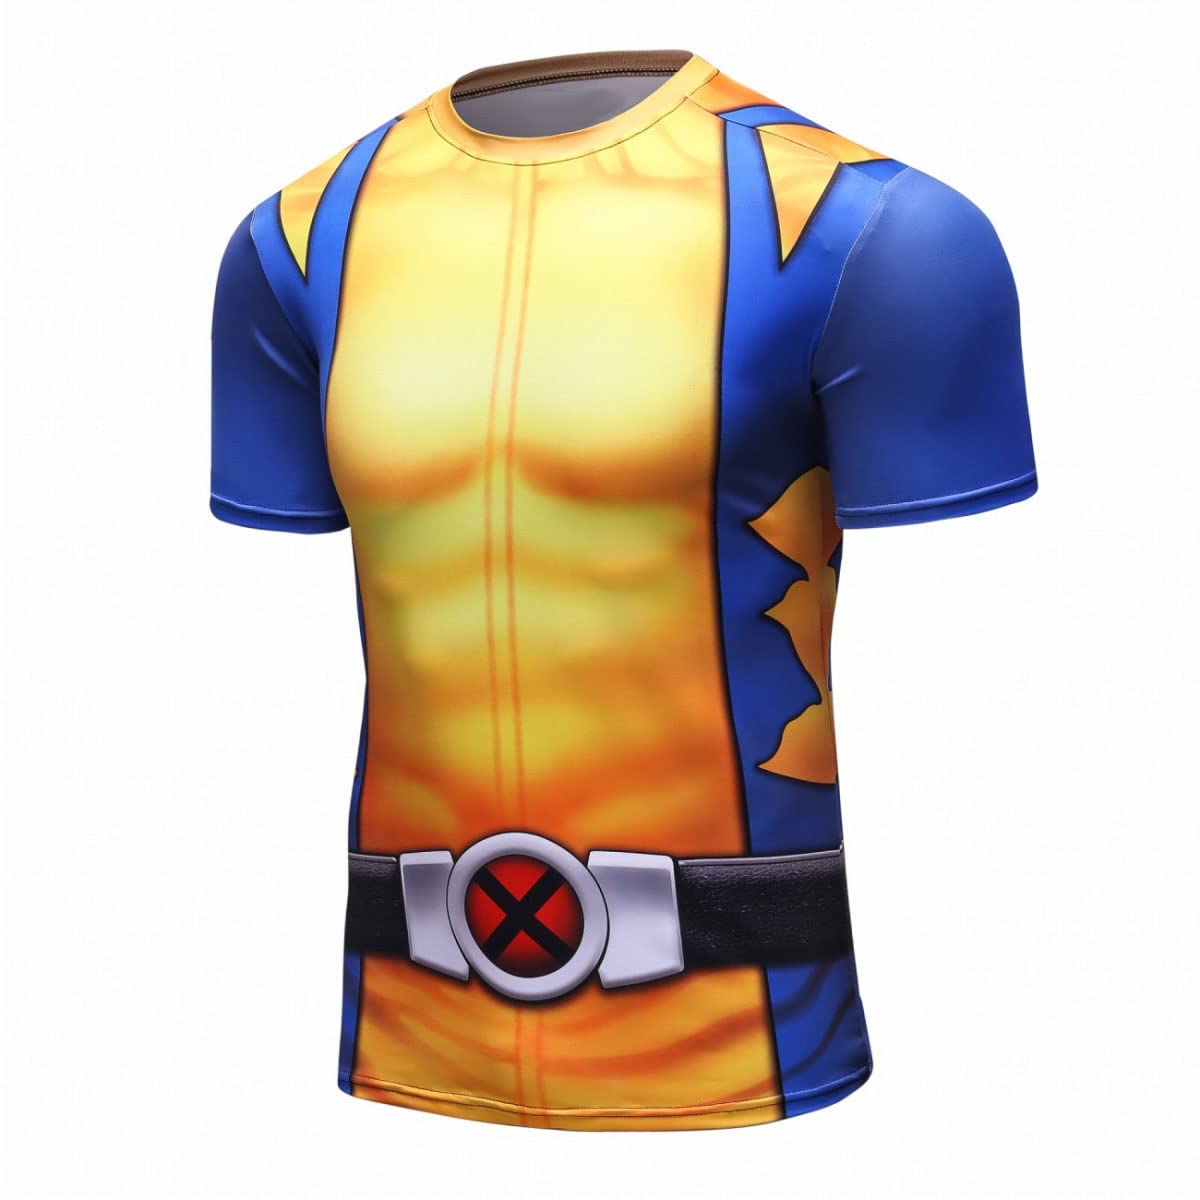 Red Plume Men's Superhero Shirt Sports Fitness T-Shirt Party/Cosplay Short Sleeve